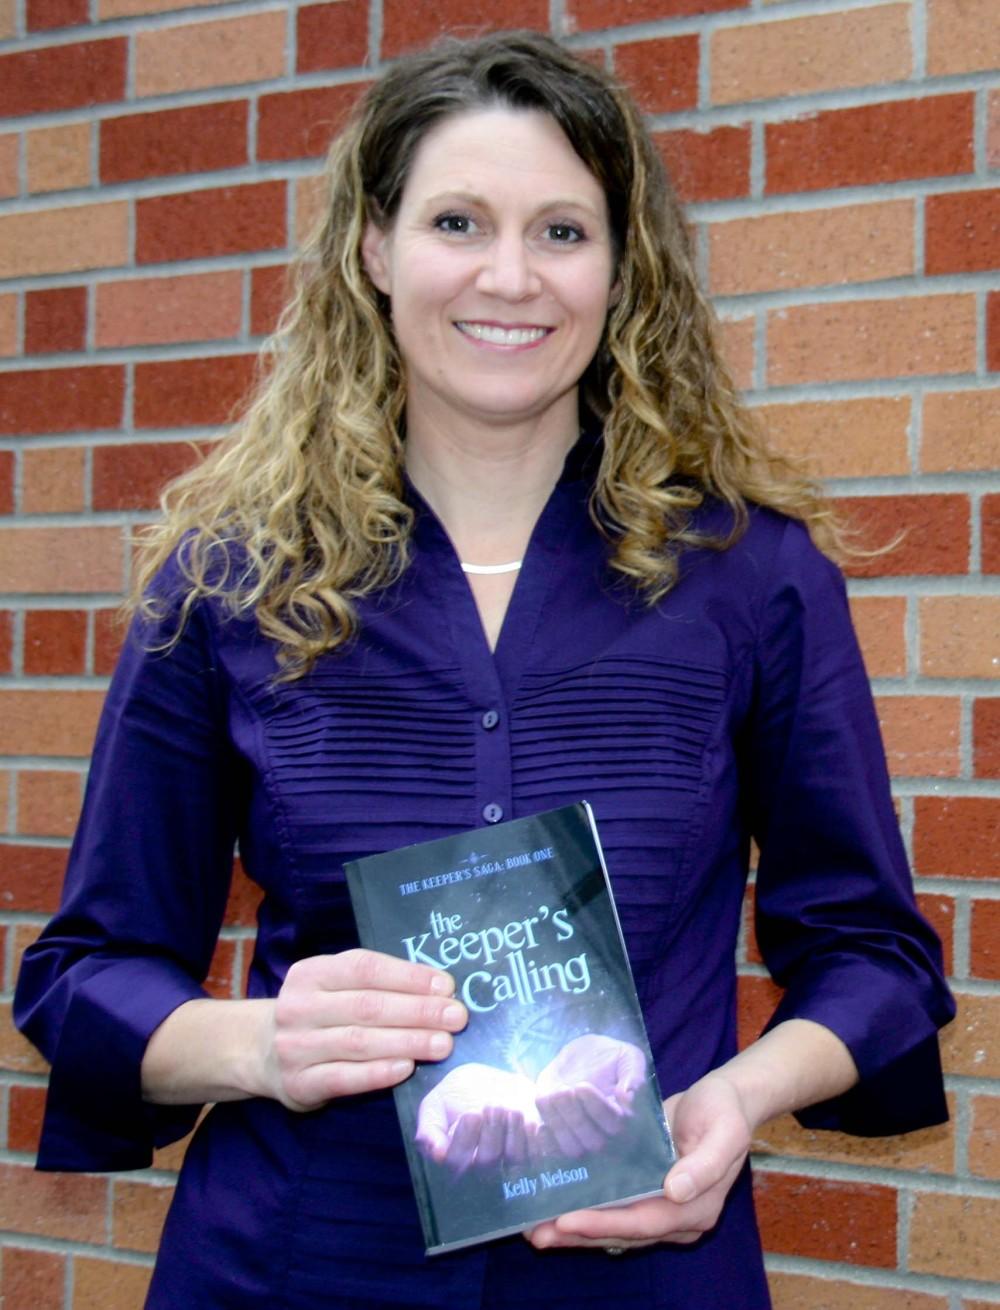 Local author makes time travel possible in her book “The Keepers Calling” 